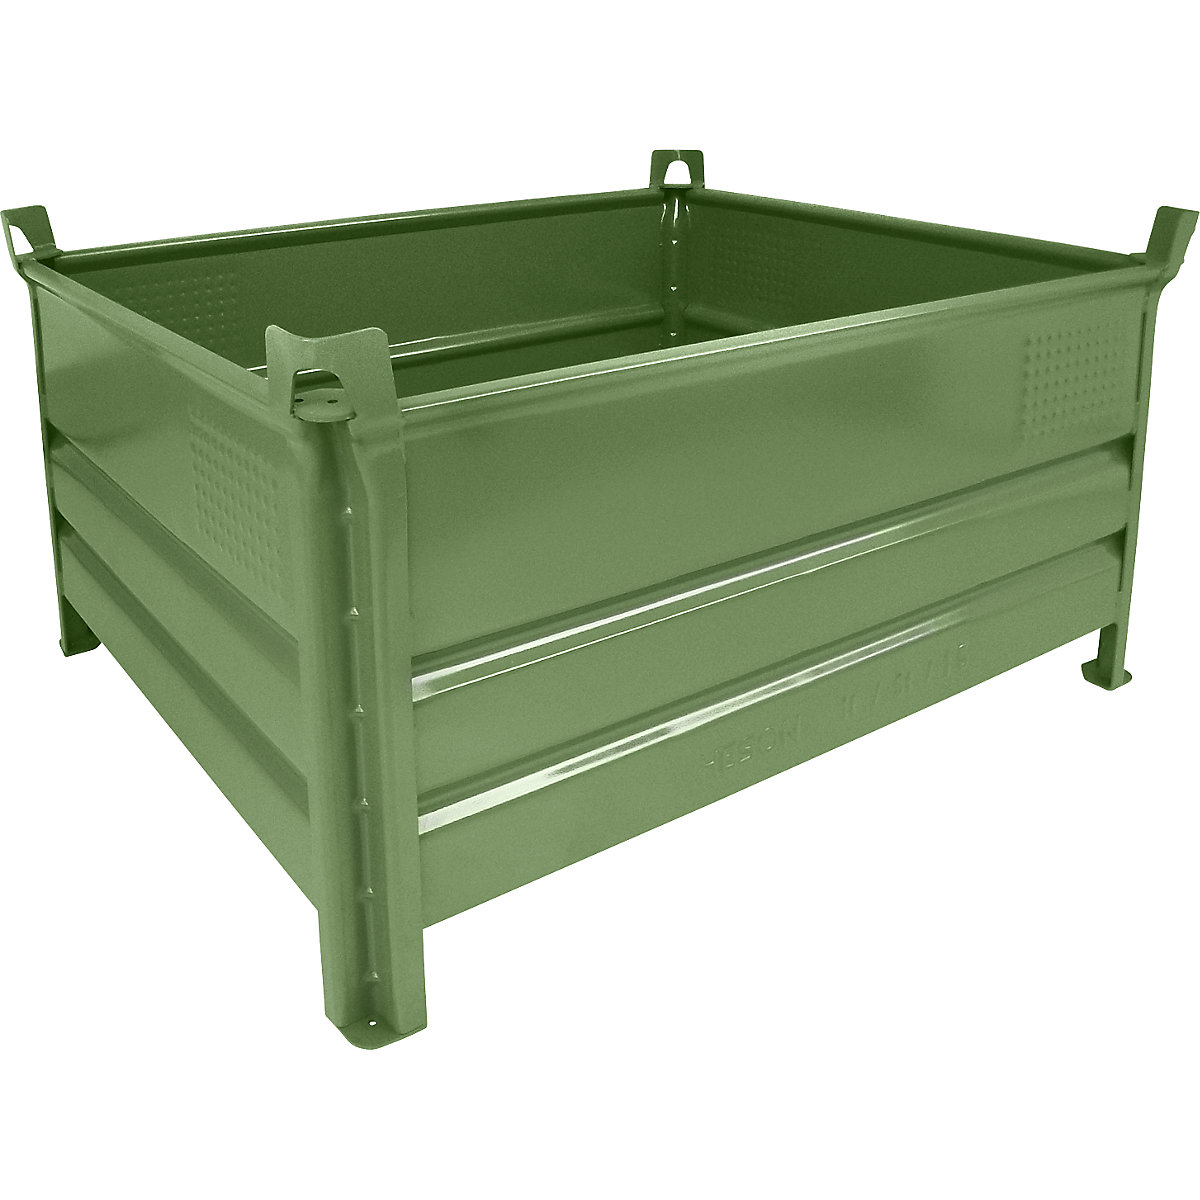 Solid panel box pallet – Heson, WxL 1000 x 1200 mm, max. load 500 kg, green, 1+ items-6